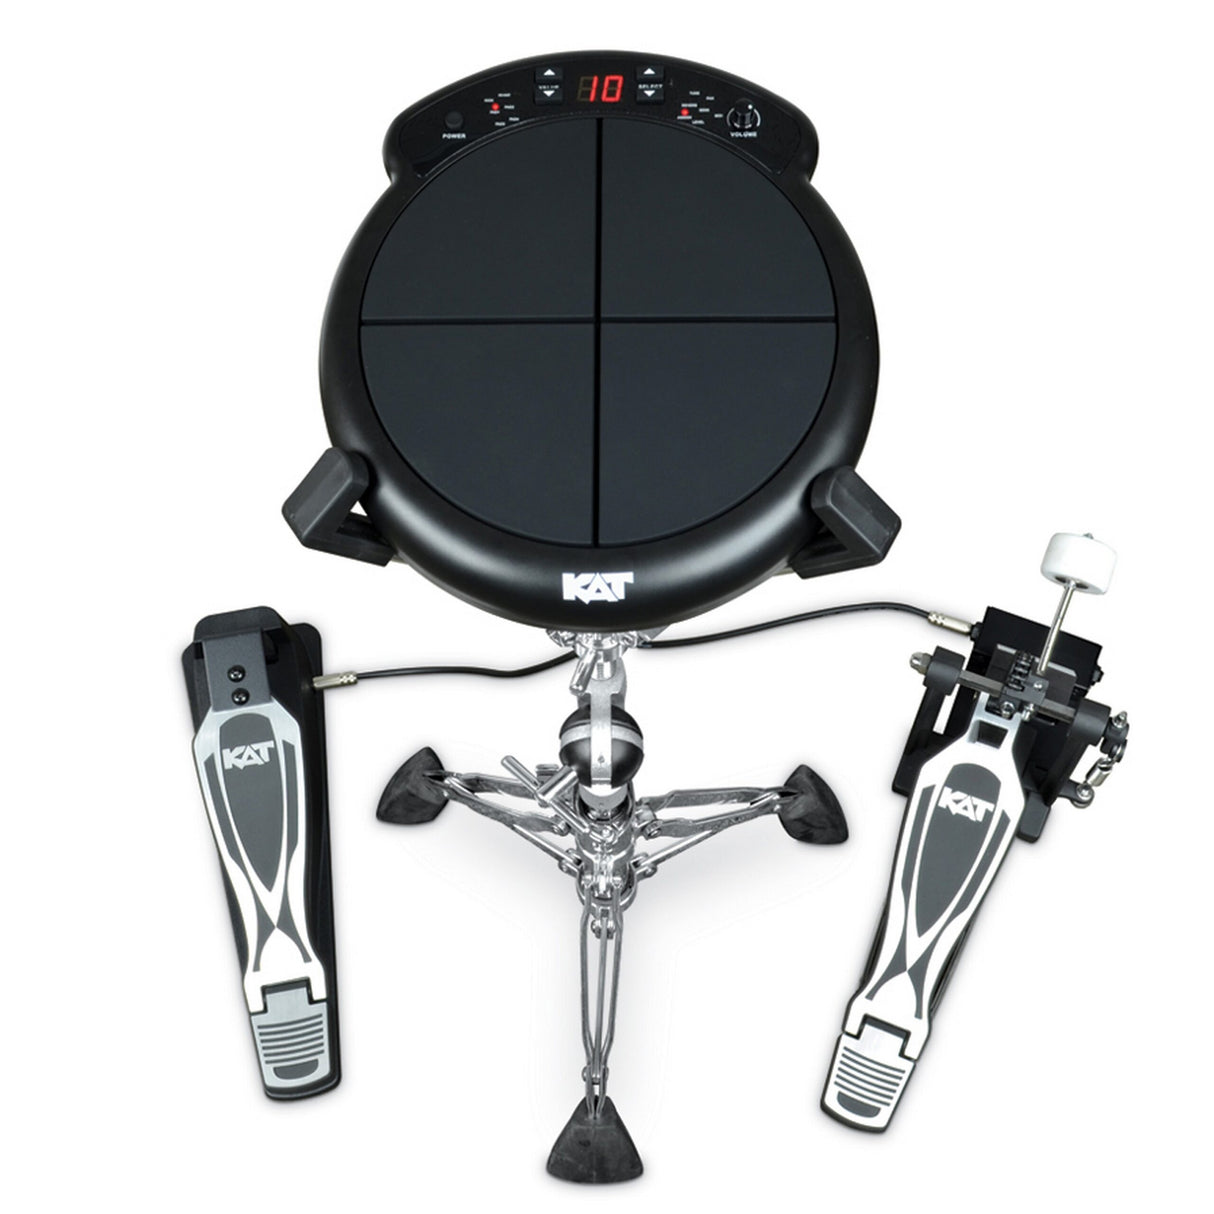 KAT Percussion KTMP1 Electronic Drum and Percussion Pad Sound Module